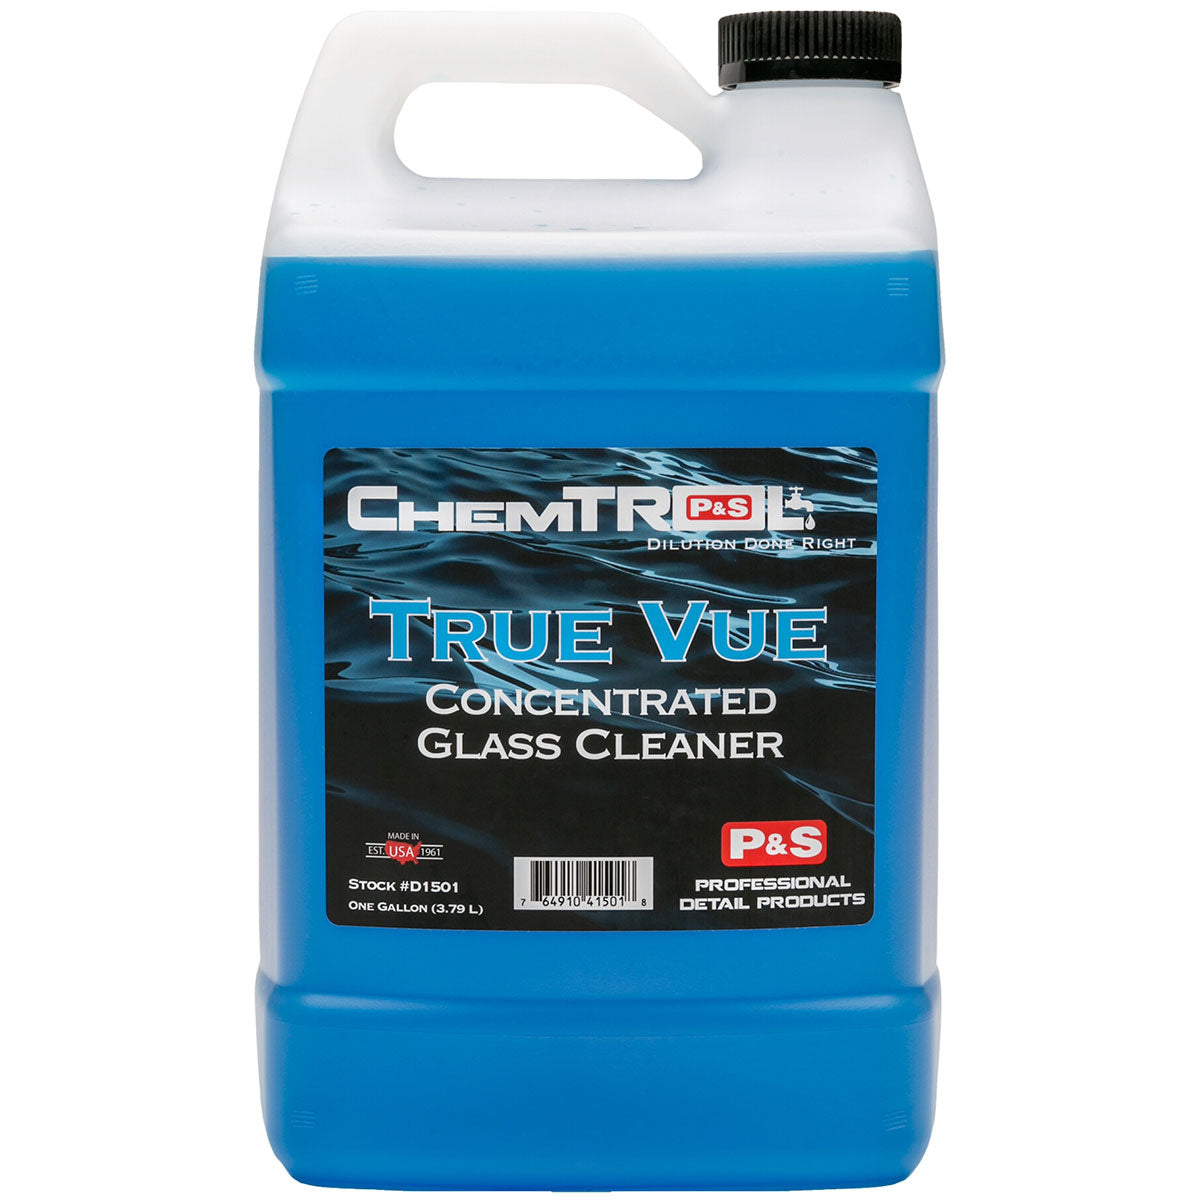 P&S True Vue Concentrated Glass Cleaner 3.79L